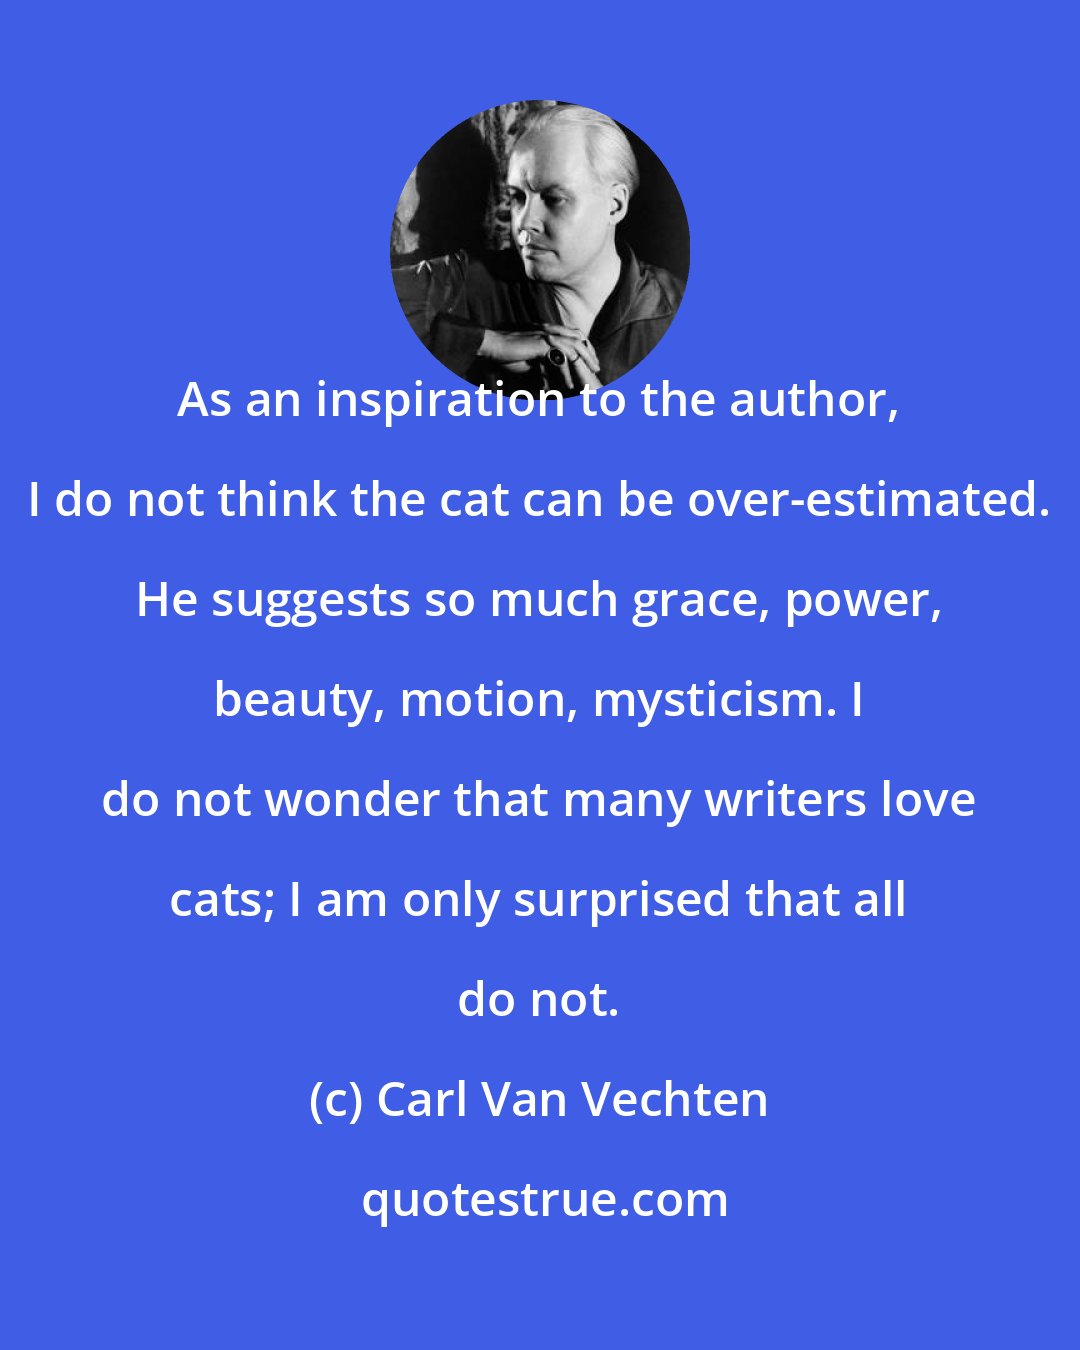 Carl Van Vechten: As an inspiration to the author, I do not think the cat can be over-estimated. He suggests so much grace, power, beauty, motion, mysticism. I do not wonder that many writers love cats; I am only surprised that all do not.